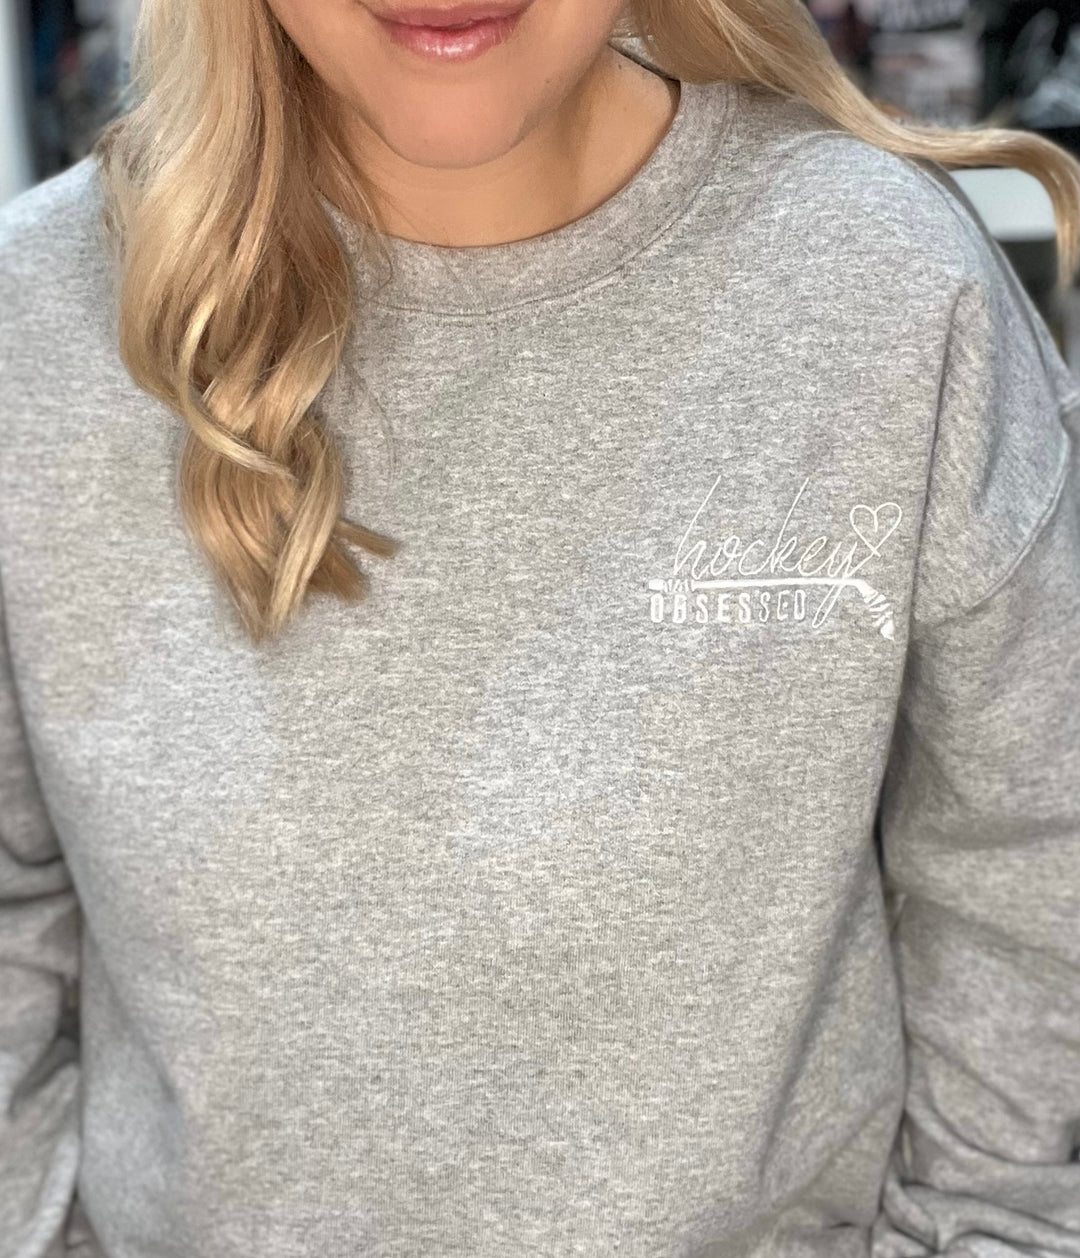 a woman wearing a gray sweatshirt and a pair of glasses